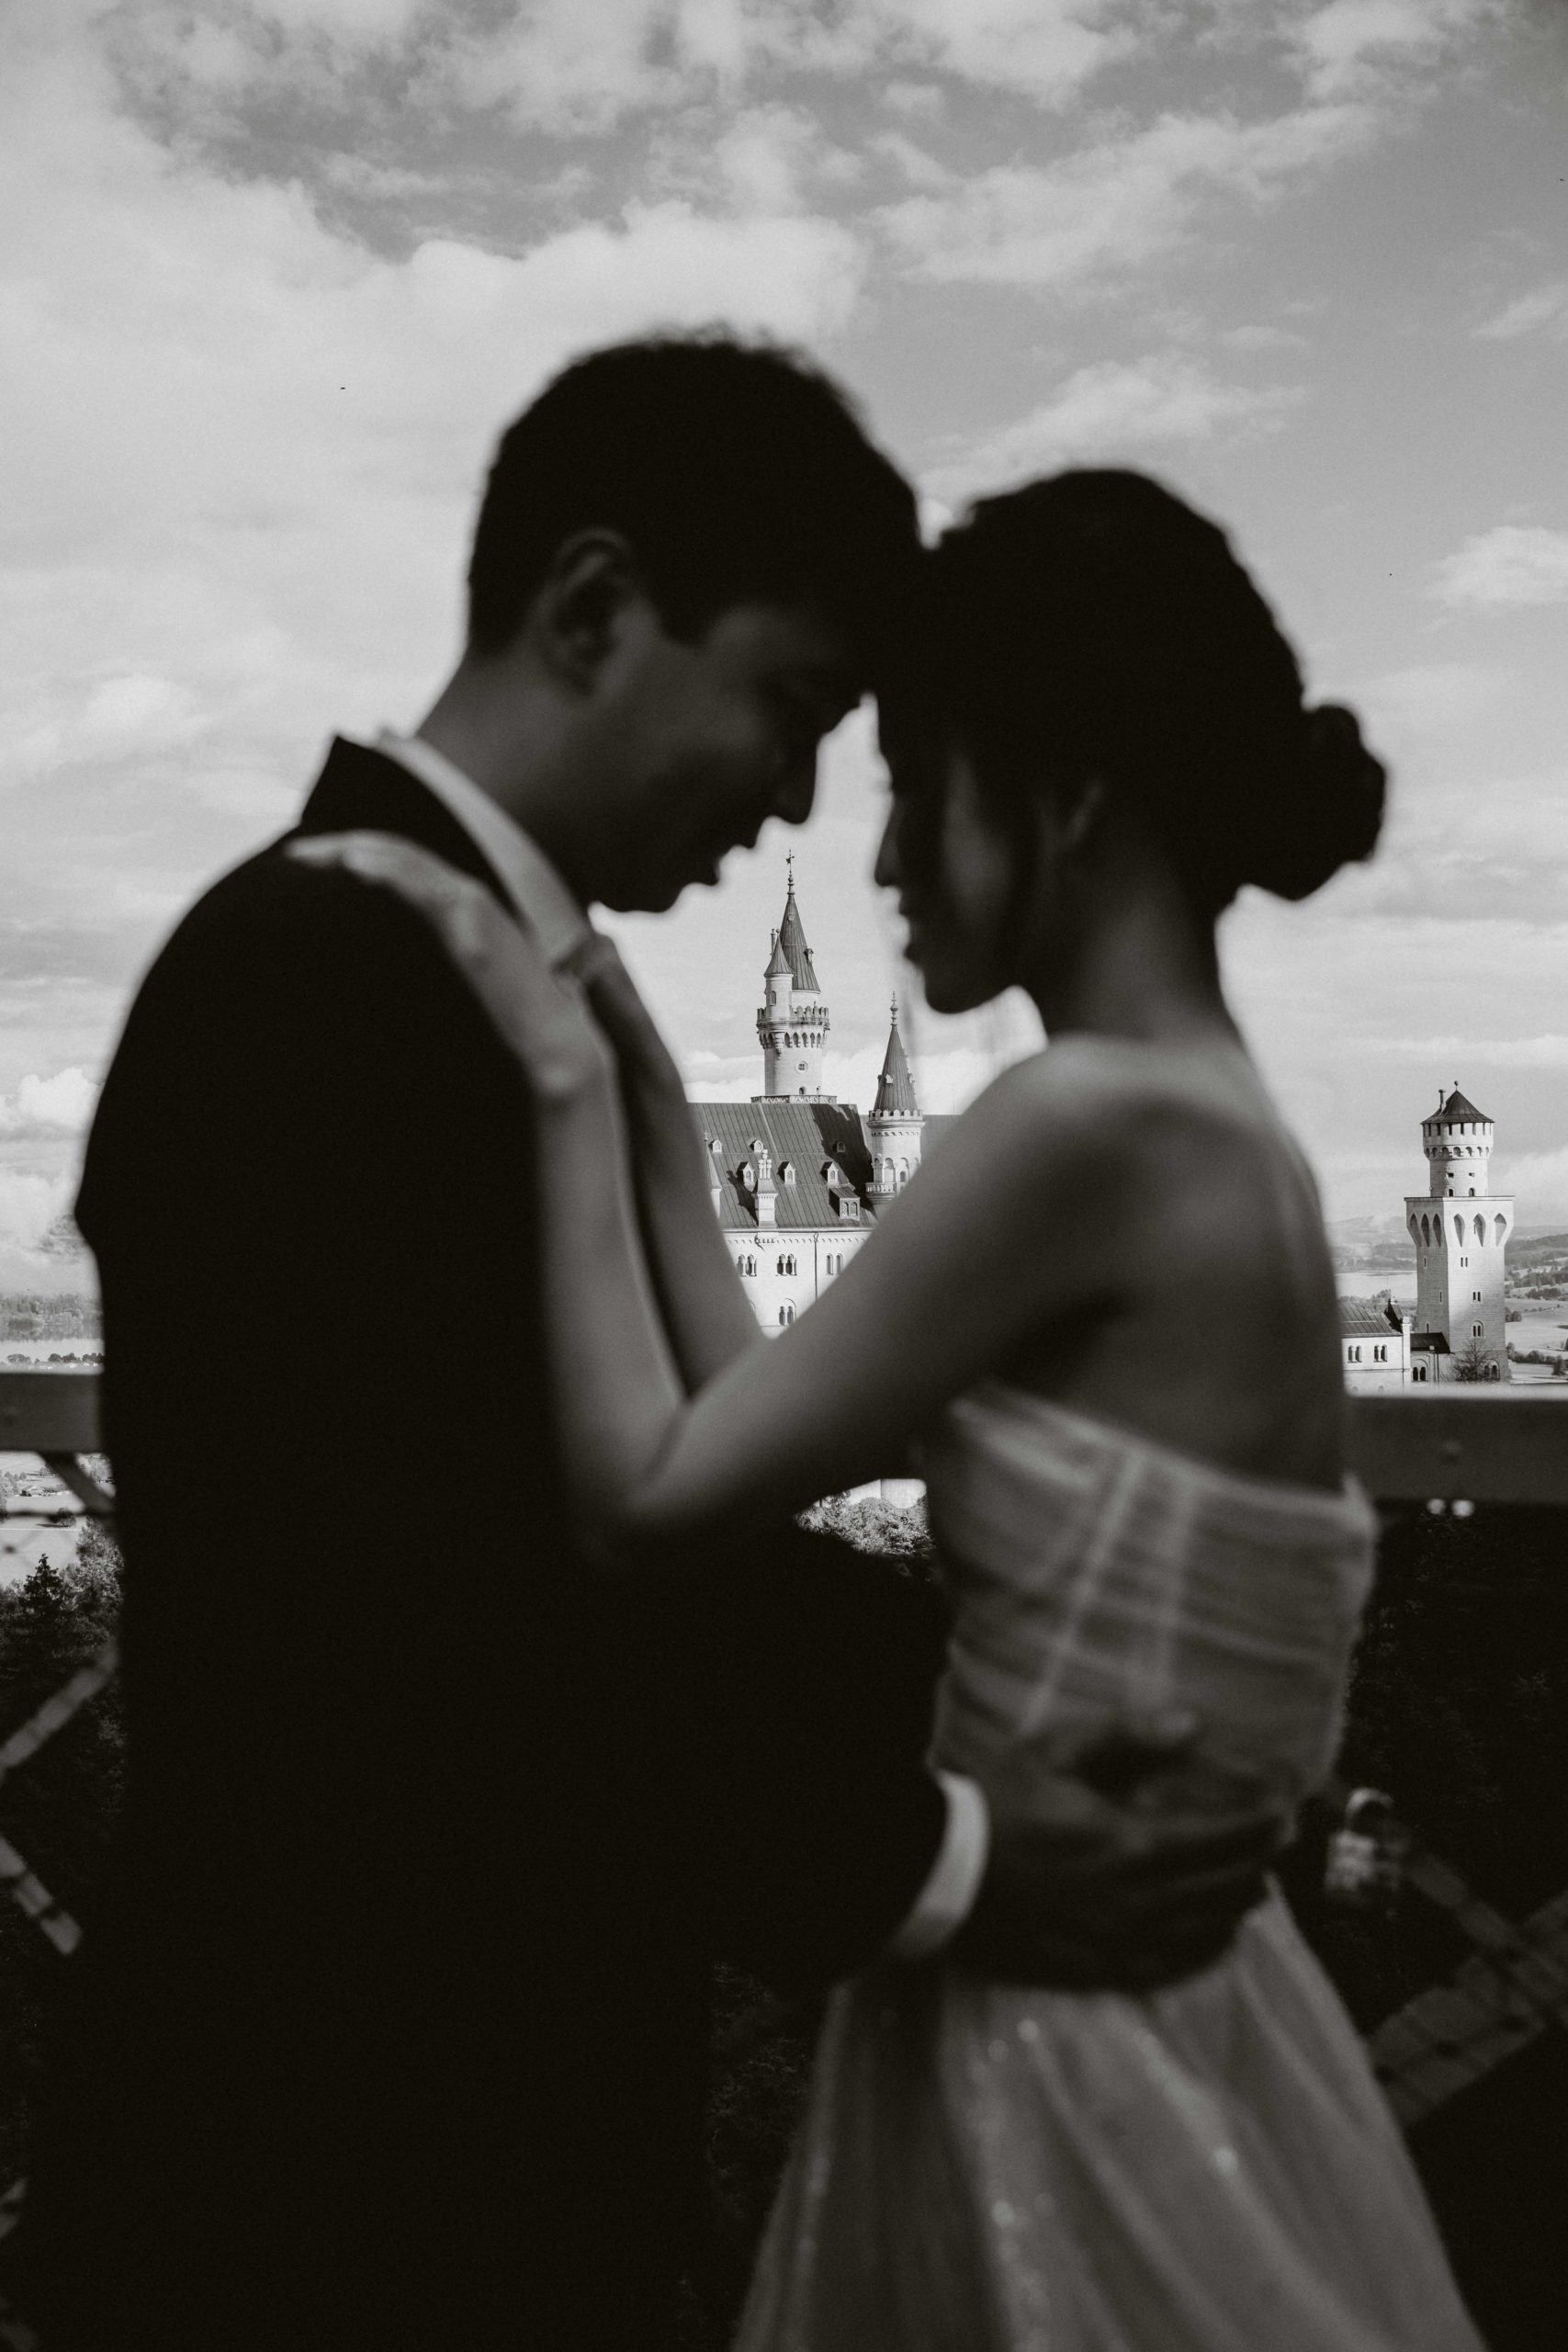 This is a black and white image of a wedding couple standing forehead to forehead with Schloss Neuschwanstein in the background between them